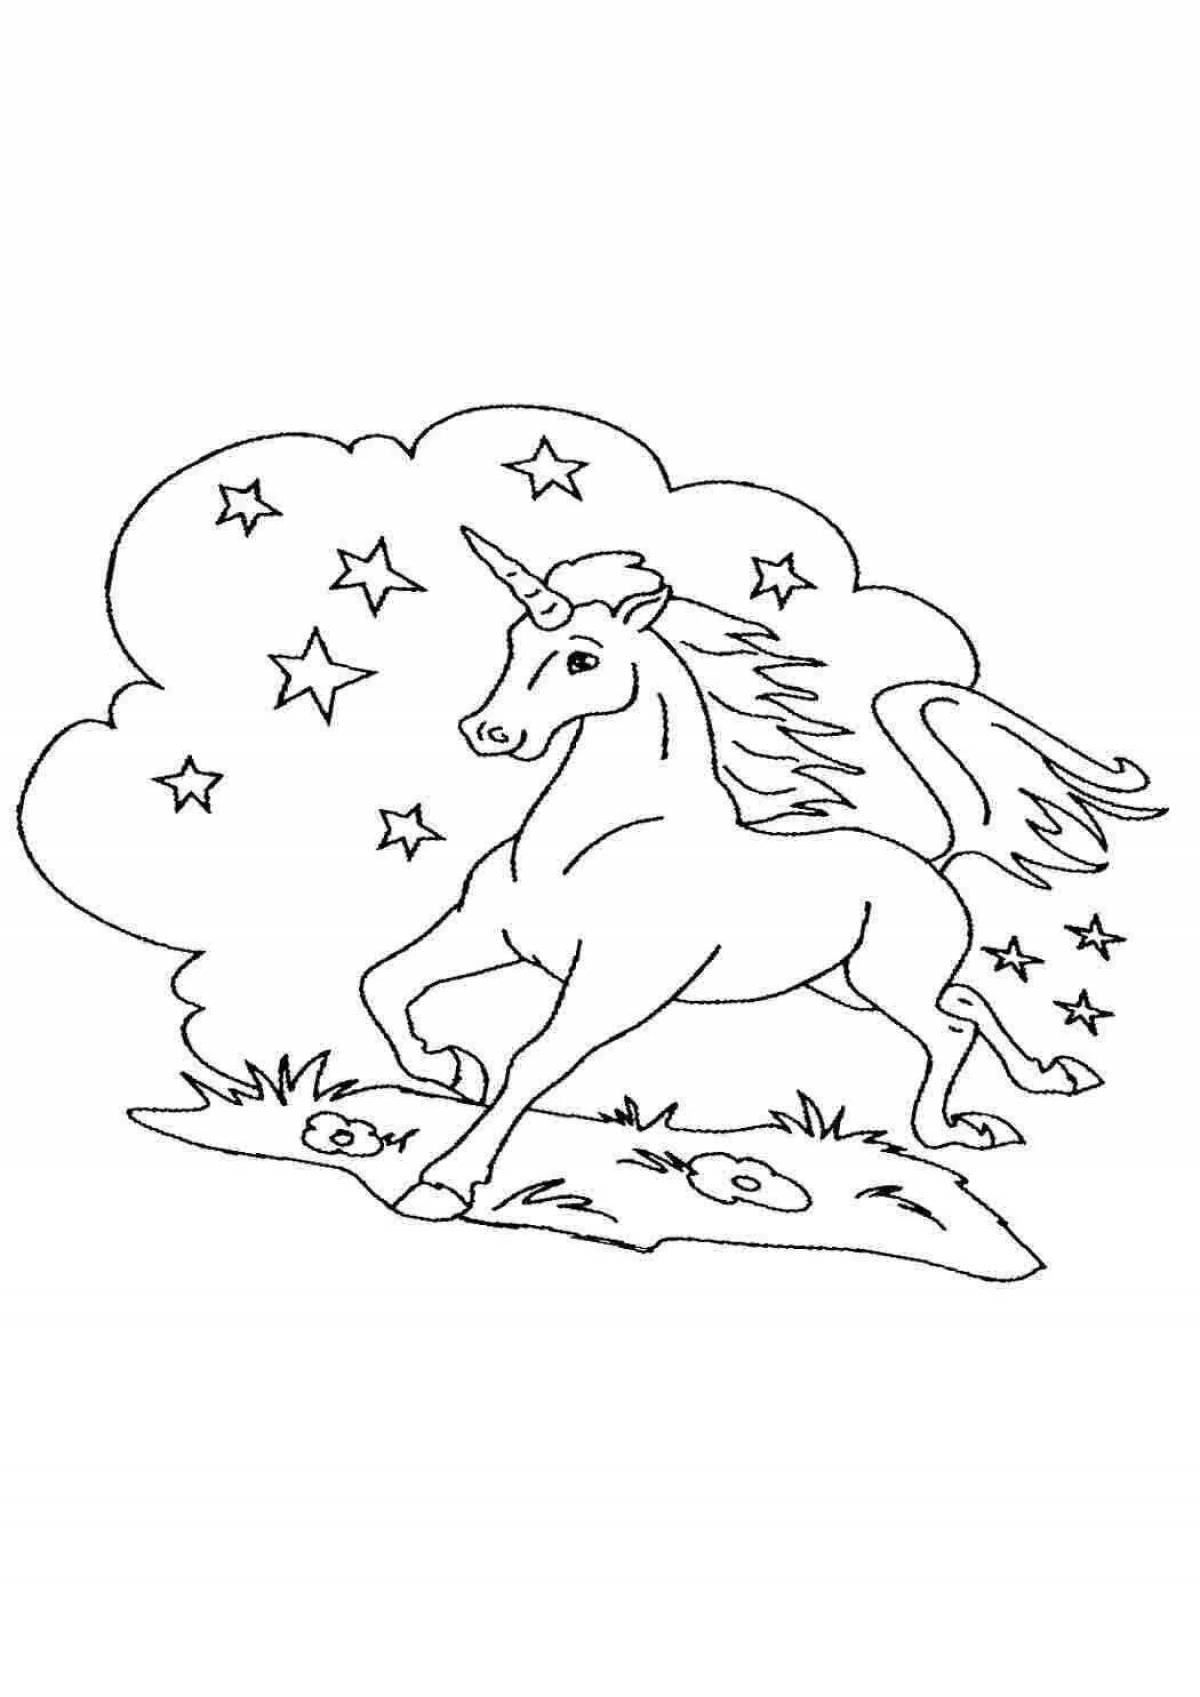 Radiant coloring page print unicorn